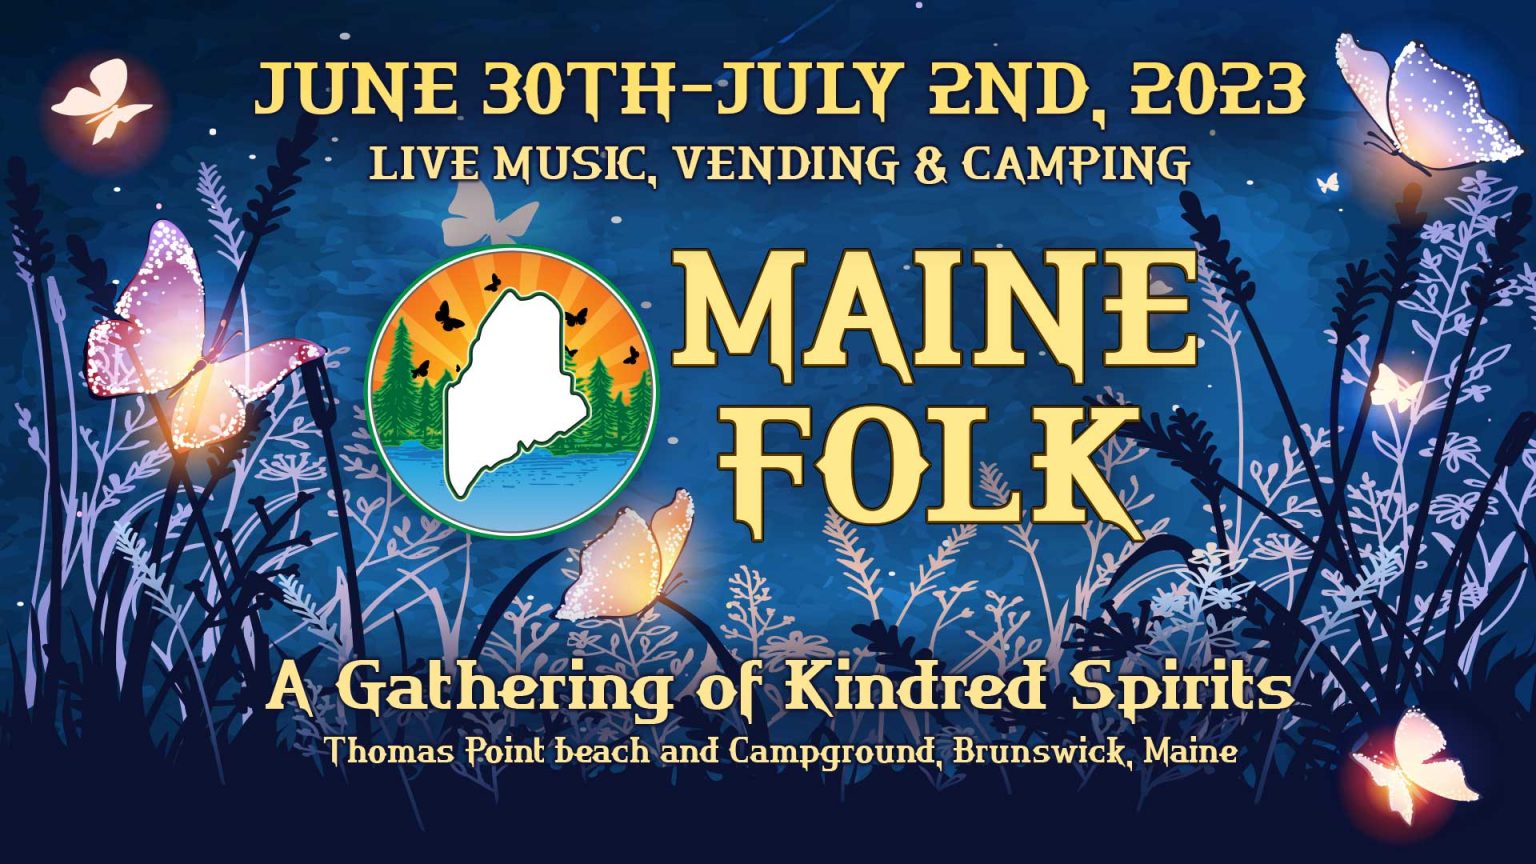 Maine Folk June 30th - July 2nd, A Gathering of Kindred Spirits